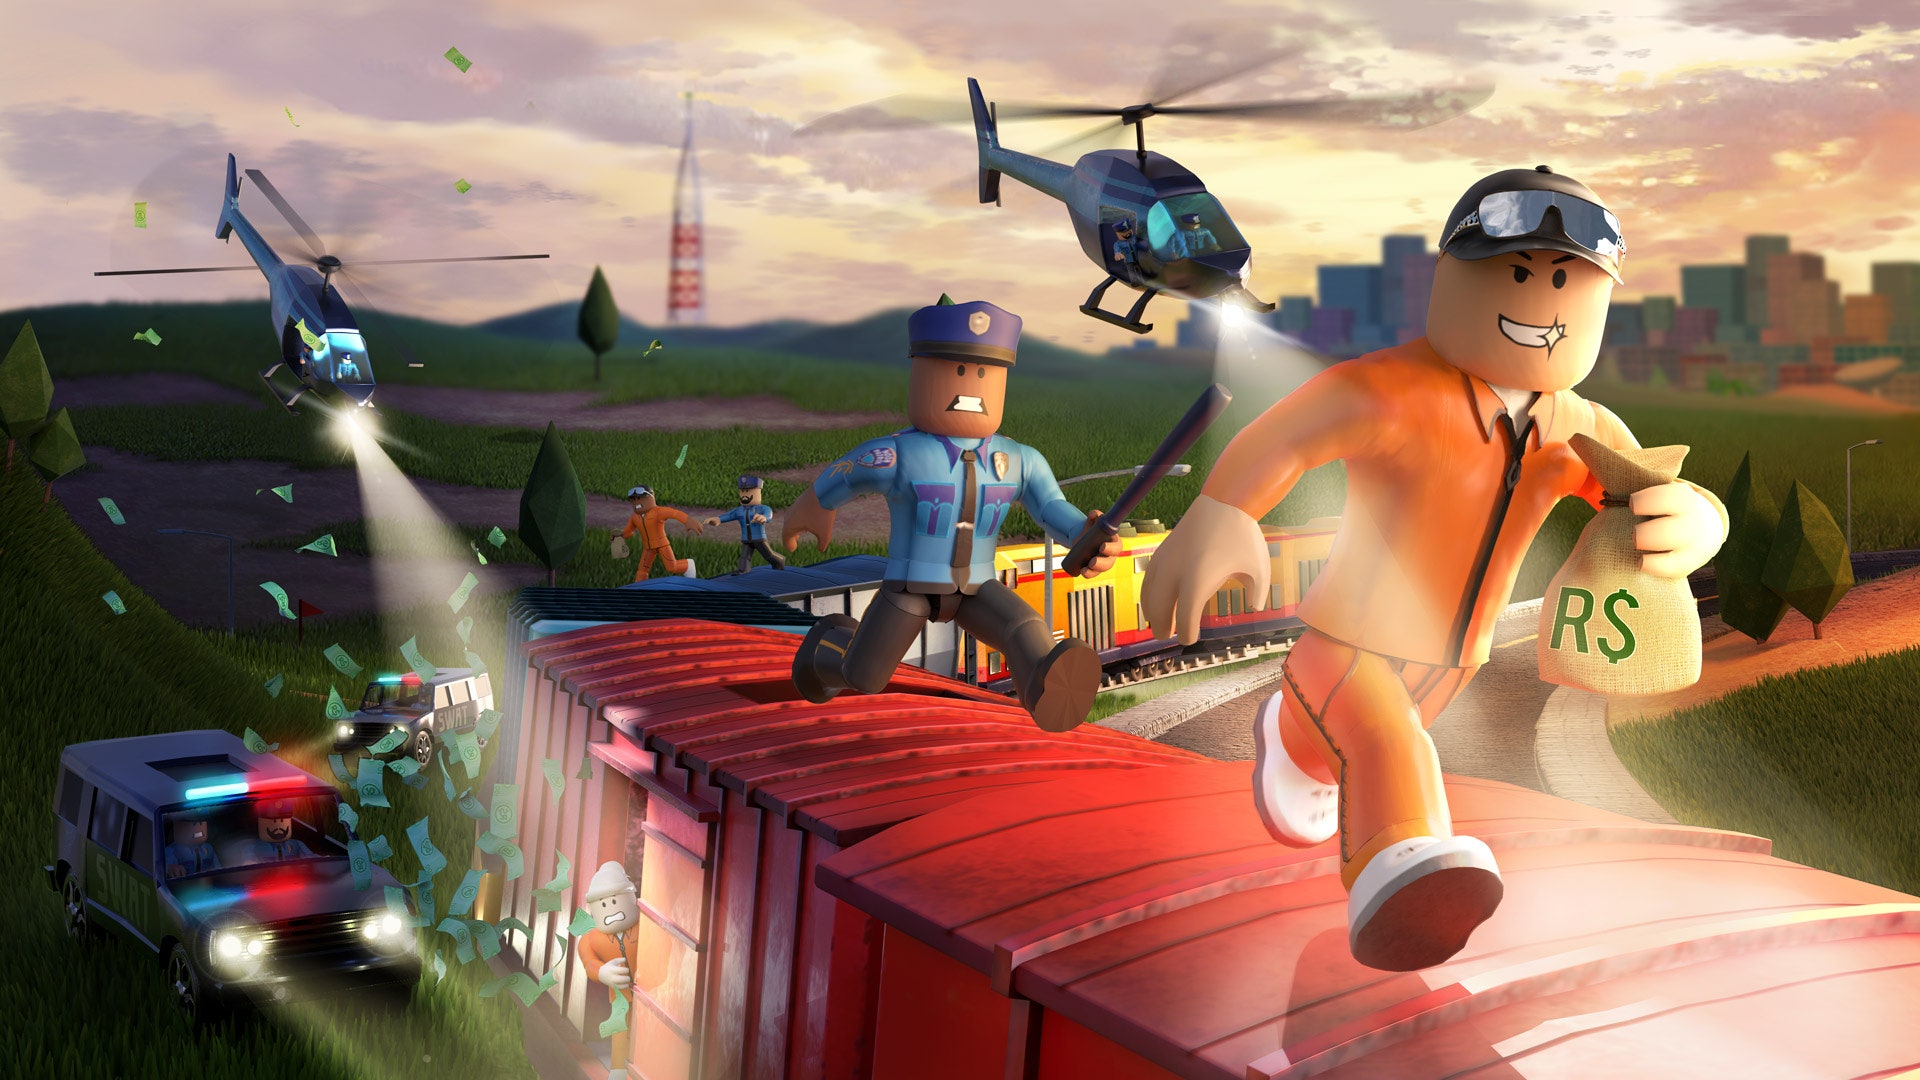 What You Need to Know About Roblox—and Why Kids Are Obsessed's Media